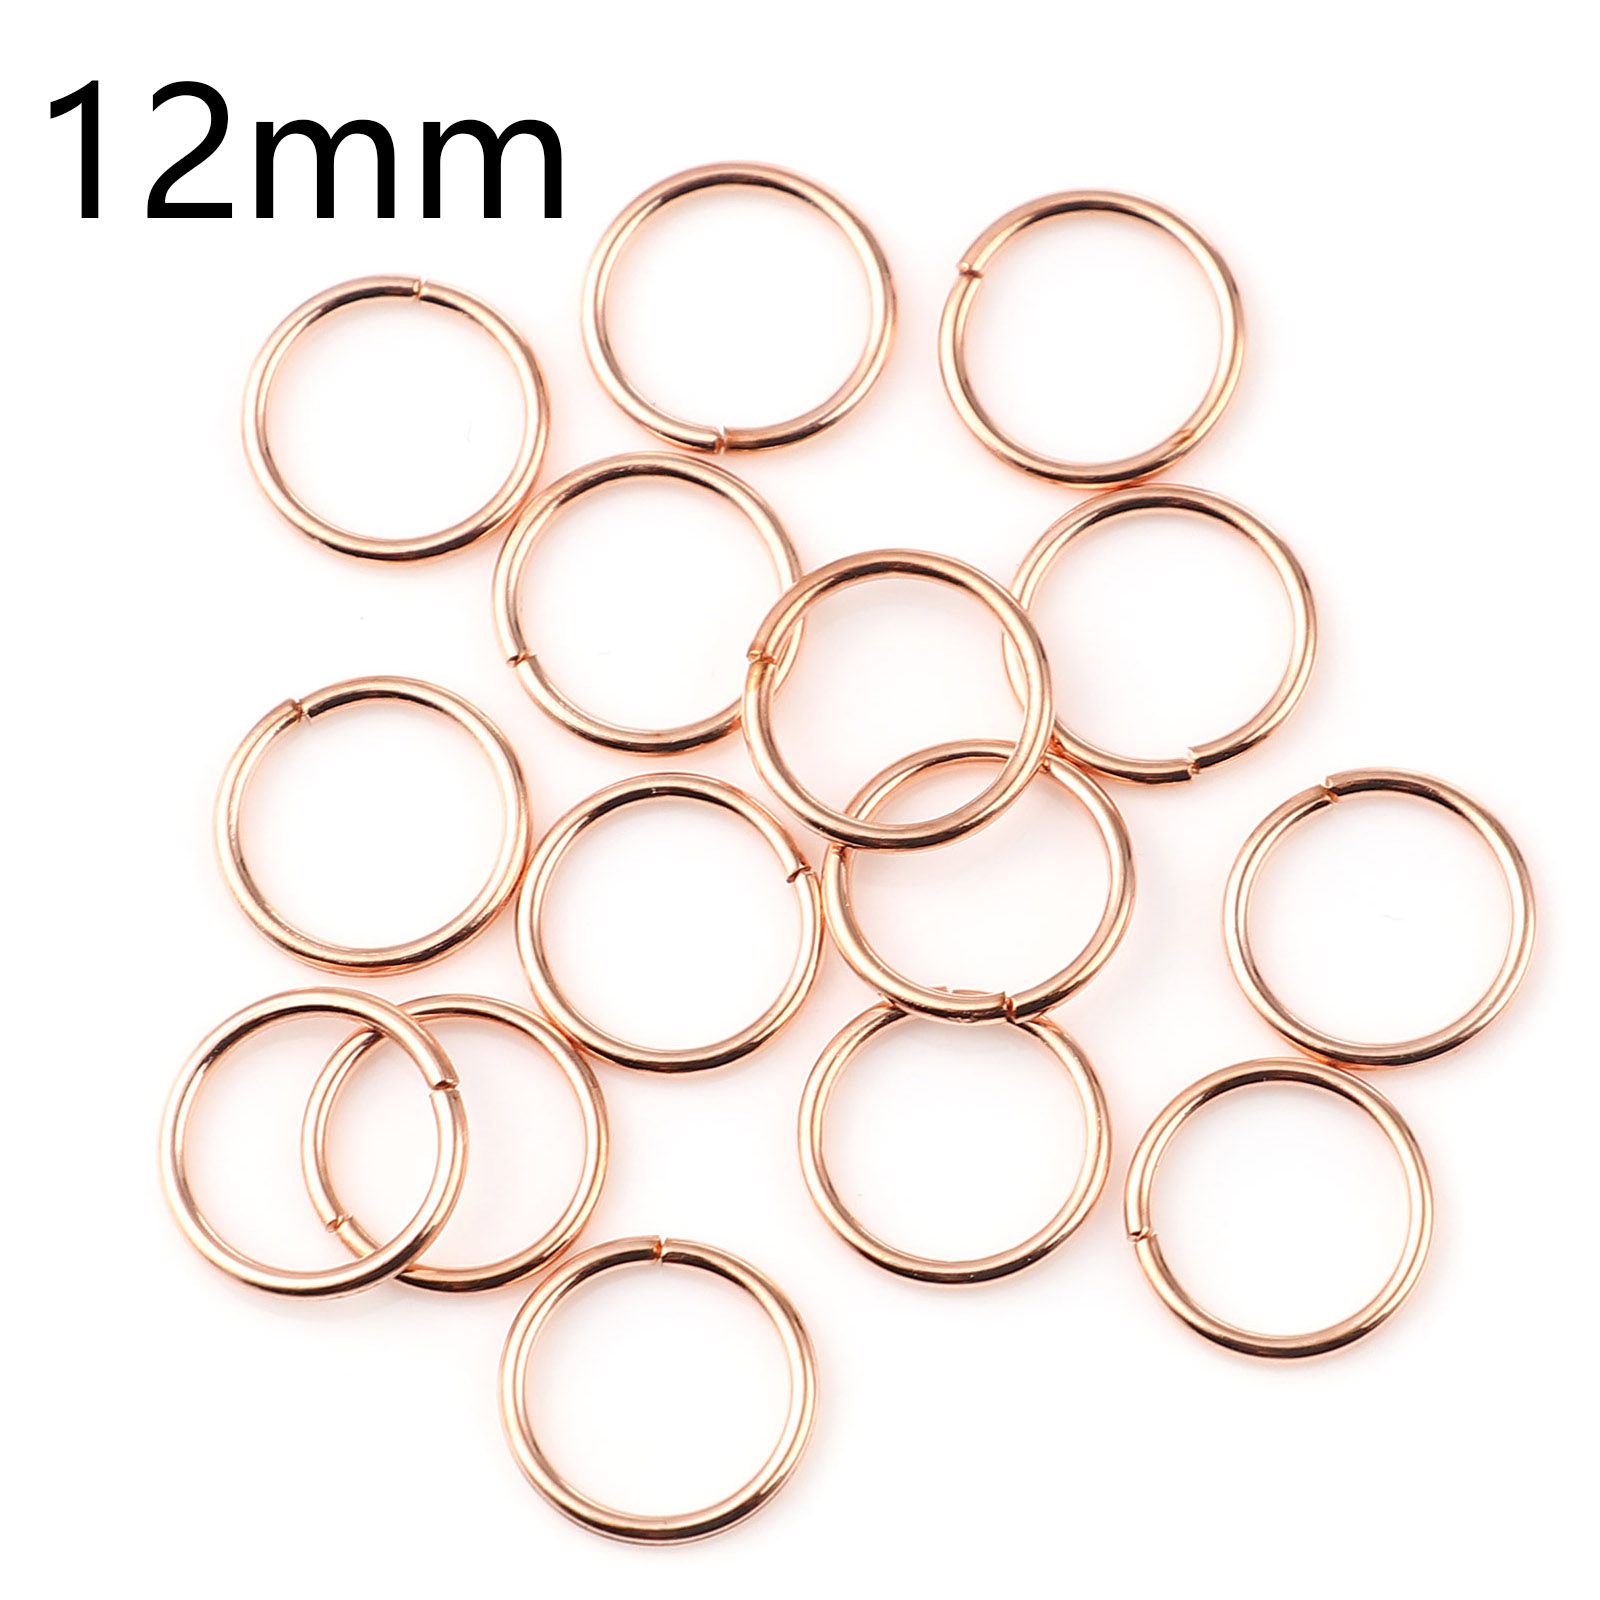 Picture of 1.2mm Iron Based Alloy Open Jump Rings Findings Circle Ring Rose Gold 12mm Dia, 200 PCs